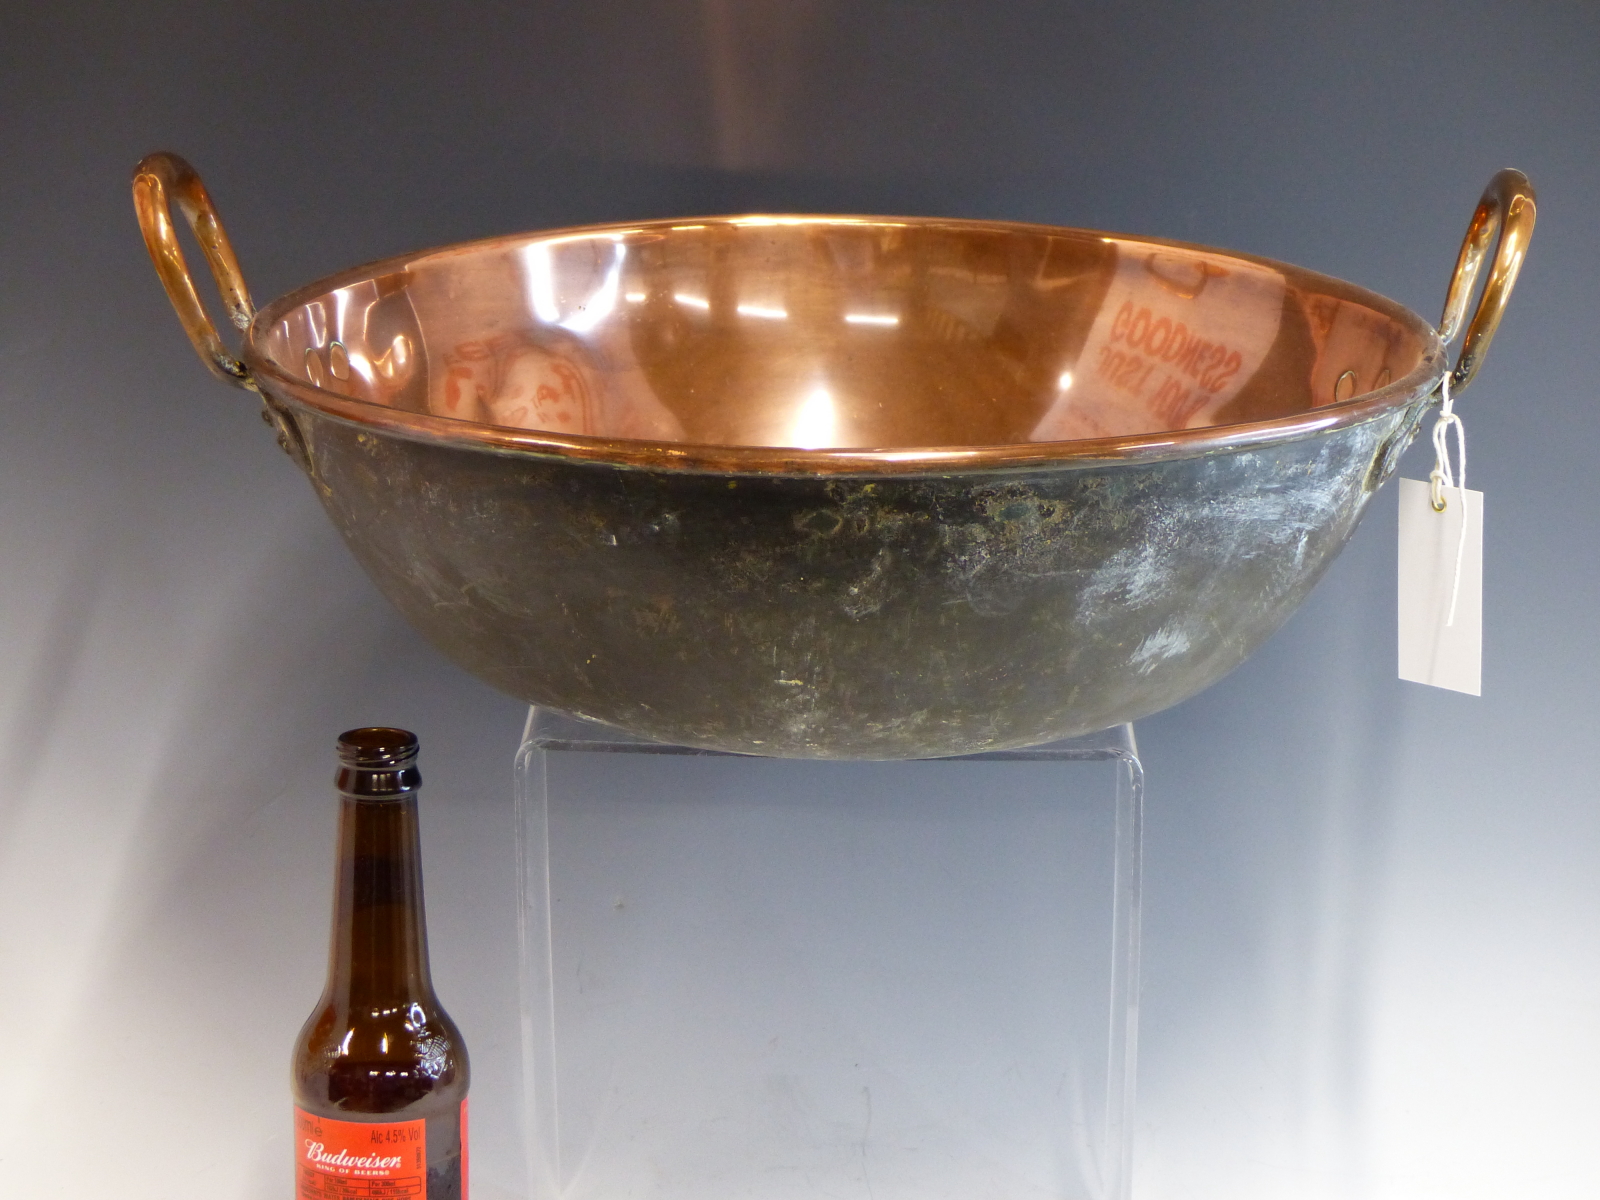 A LARGE VICTORIAN COPPER COUNTRY HOUSE KITCHEN MIXING BOWL. - Image 2 of 5